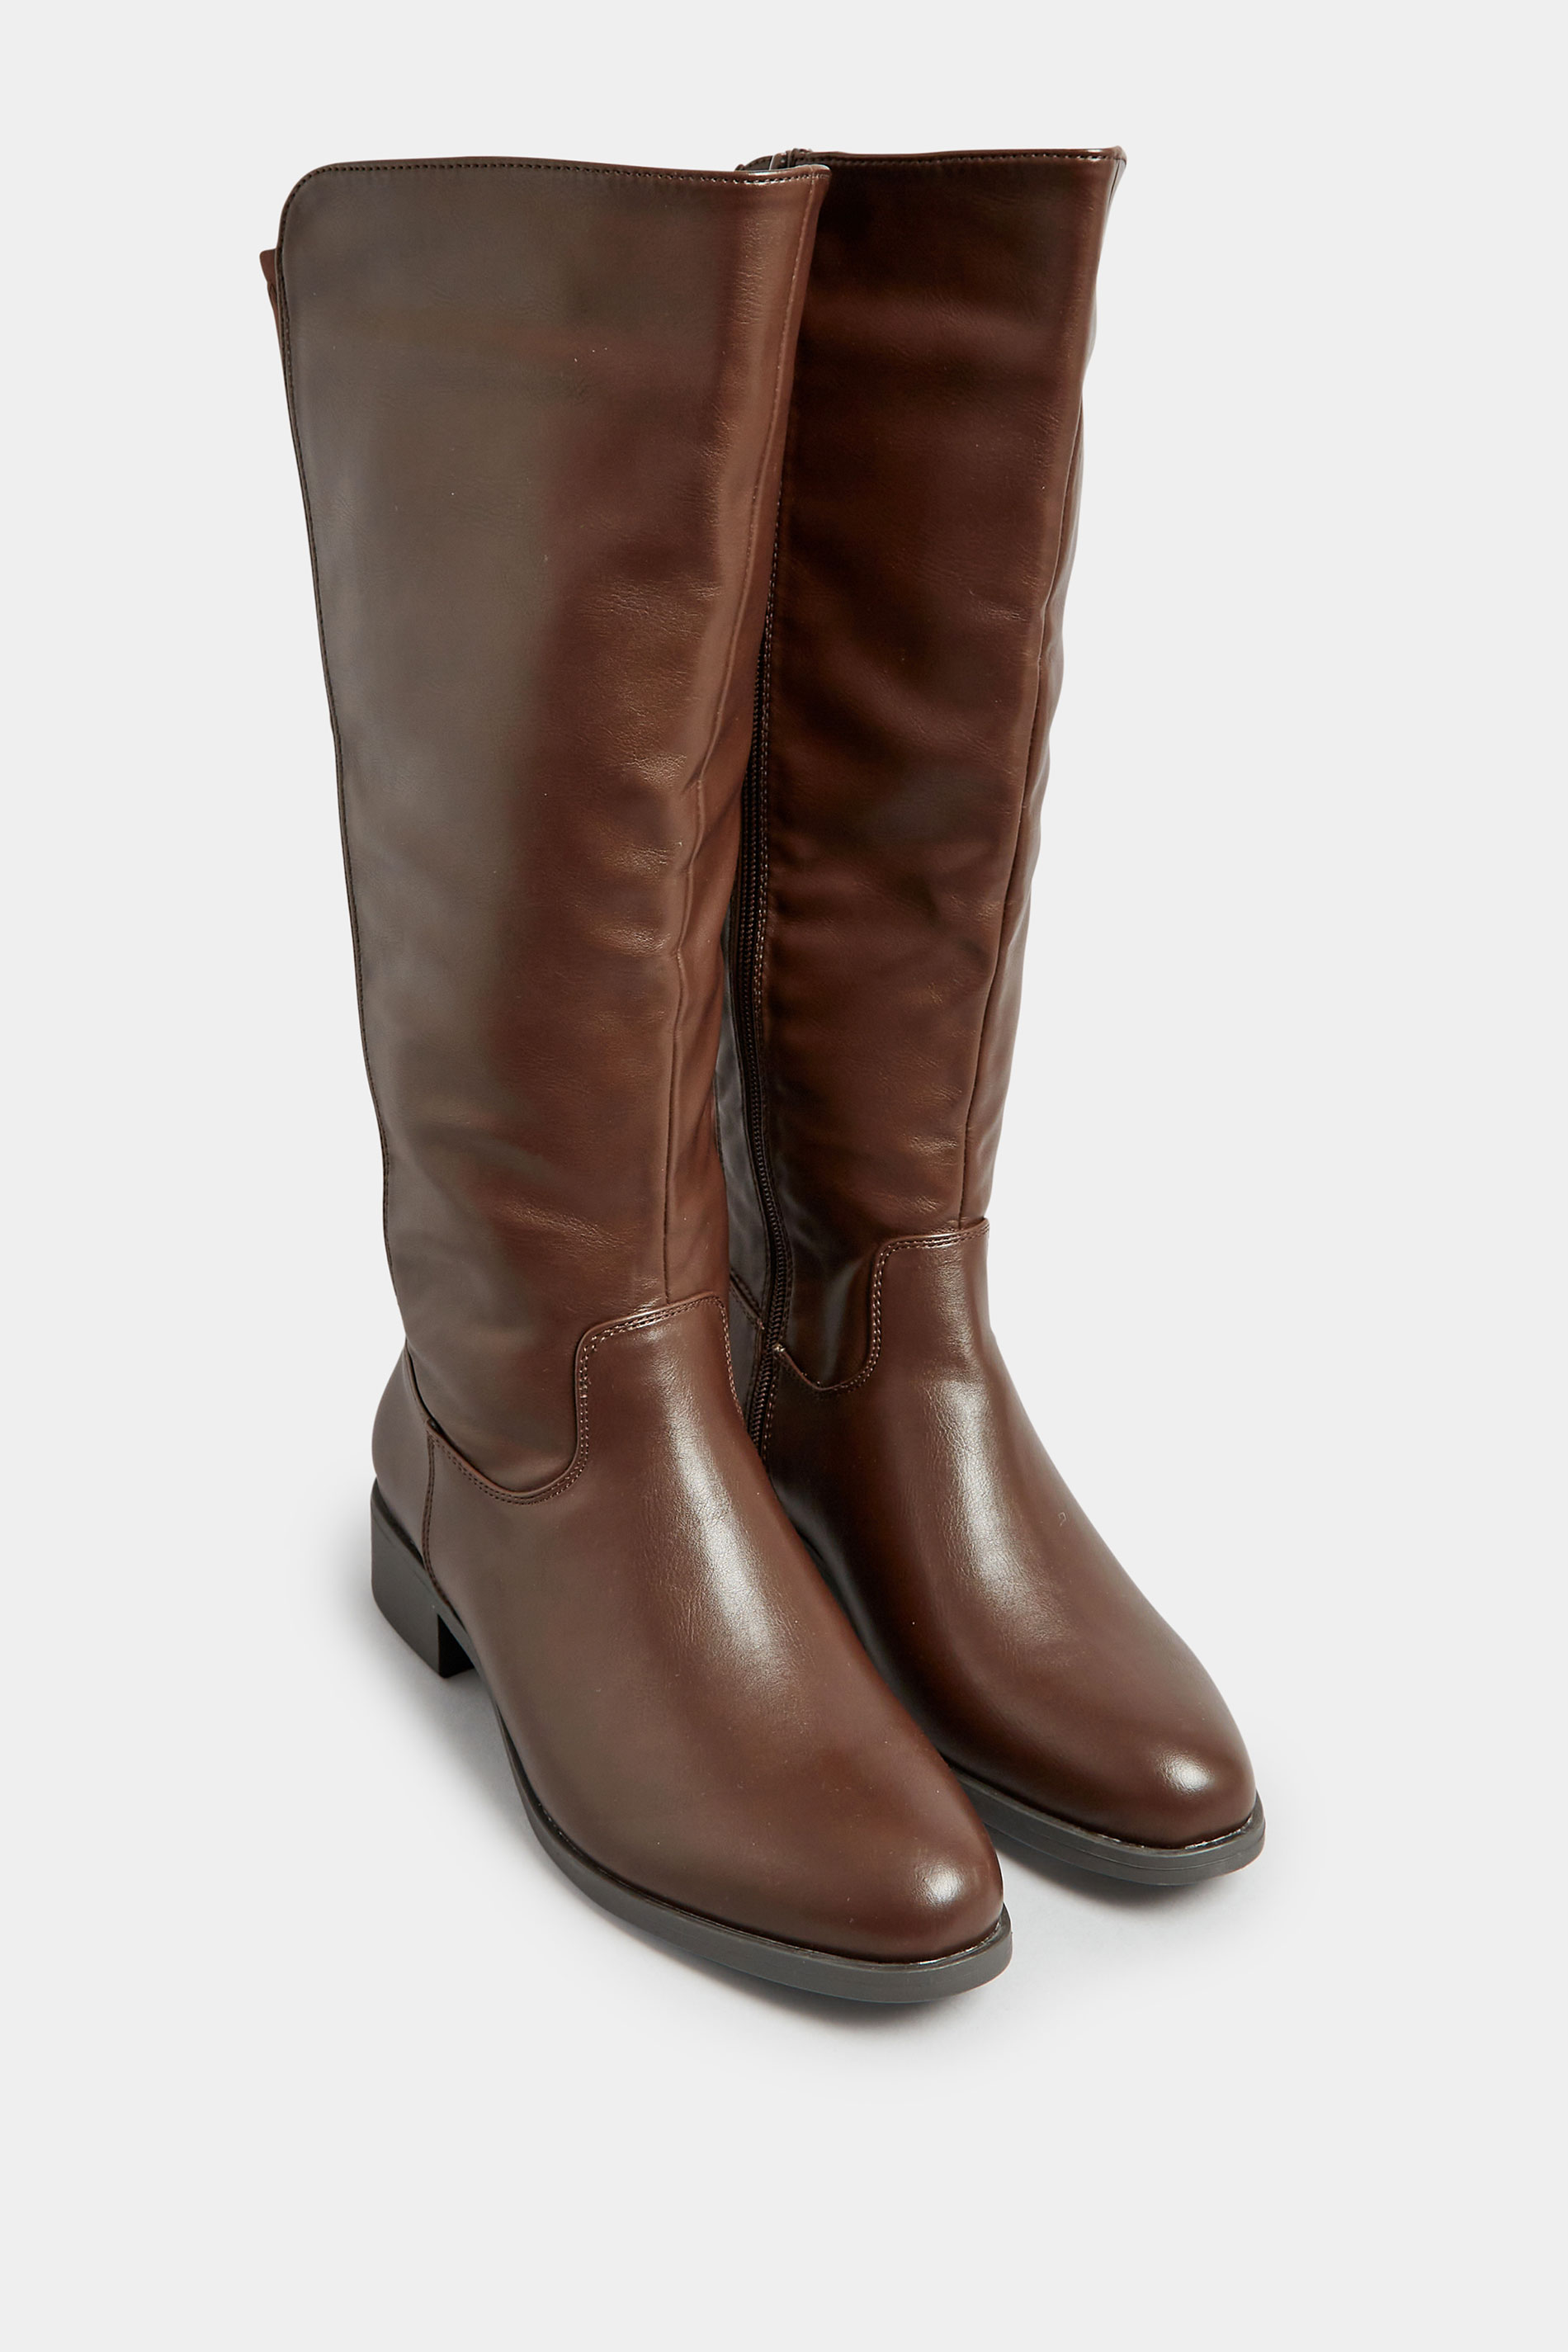 Chocolate Brown PU Stretch Heeled Knee High Boots In Wide E Fit & Extra Wide EEE Fit 2